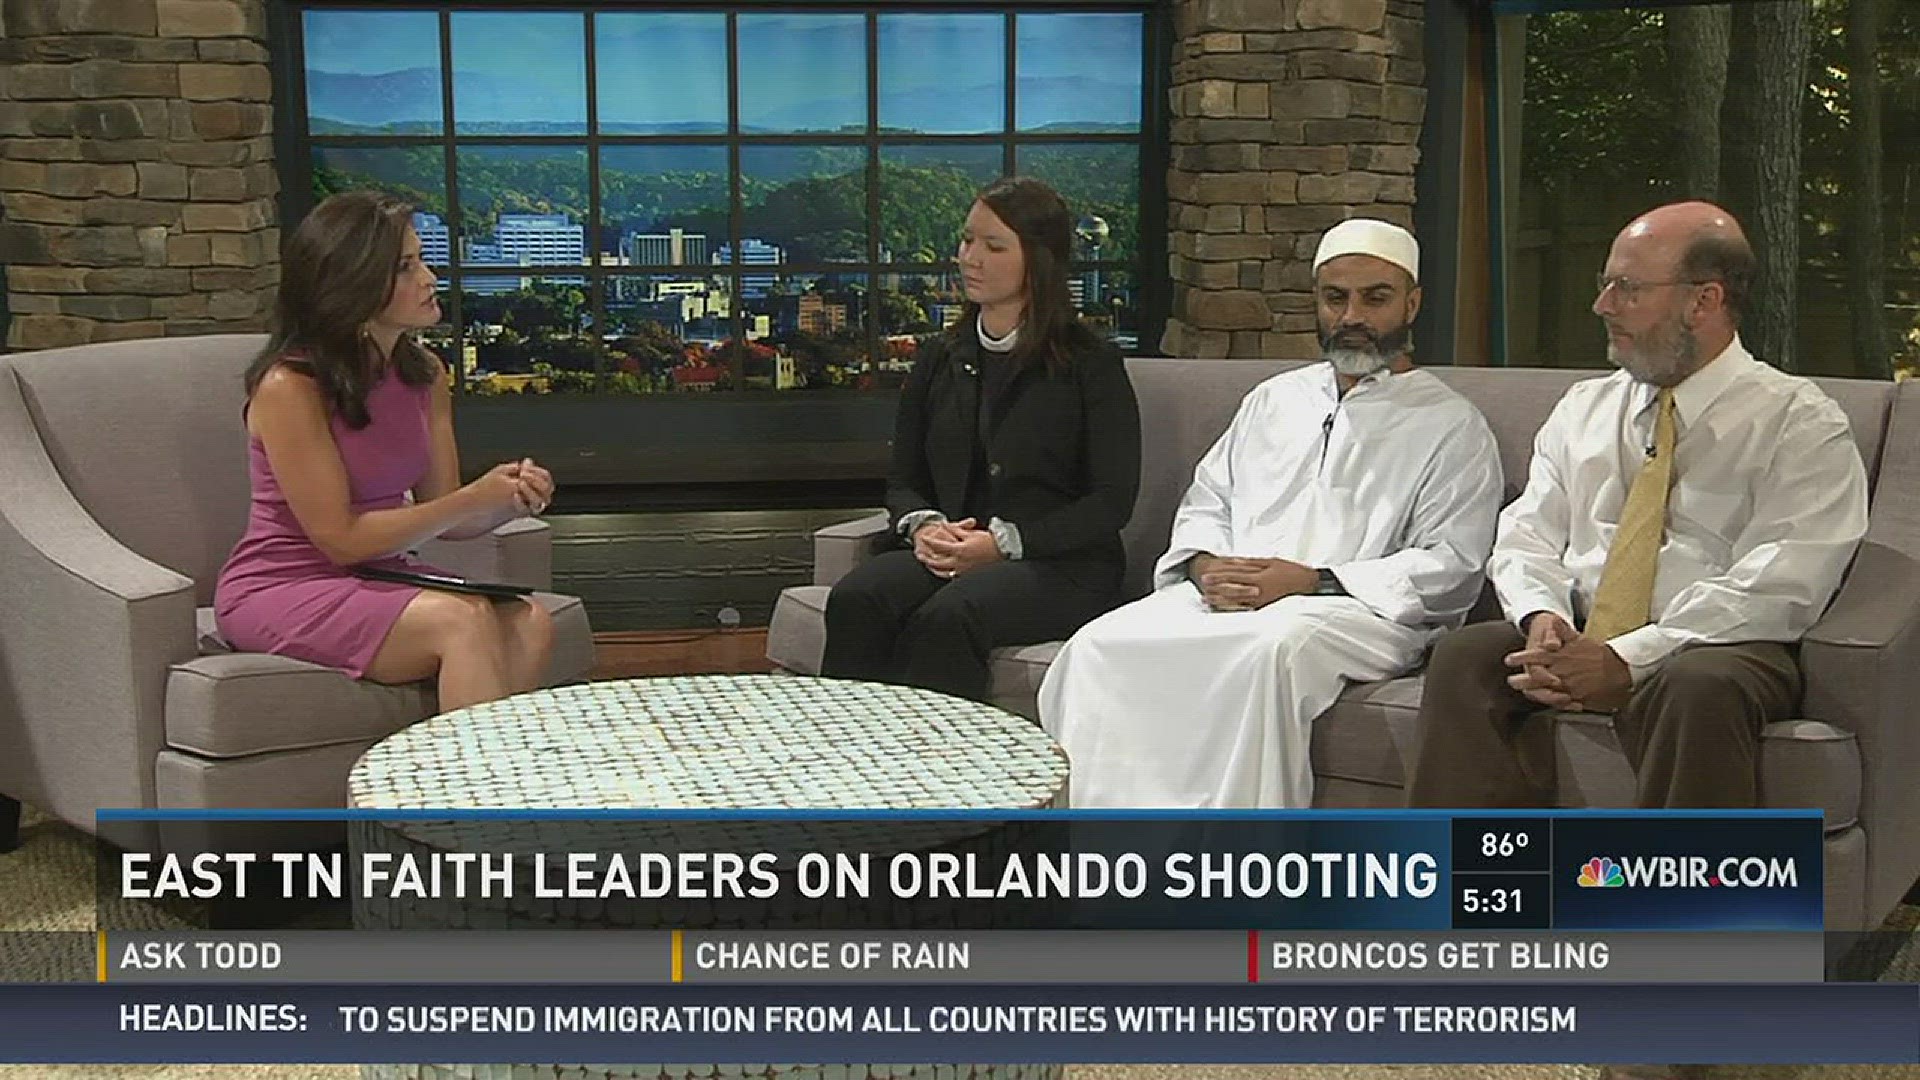 Beth hosts a round-table discussion on faith and healing after the Orlando shooting with Nadeem Saddiqi, a member of the Muslim community in Knoxville, Reverend Chris Buice with the TVUUC, and Pastor Ashley Helton with the Church Street United Methodist C